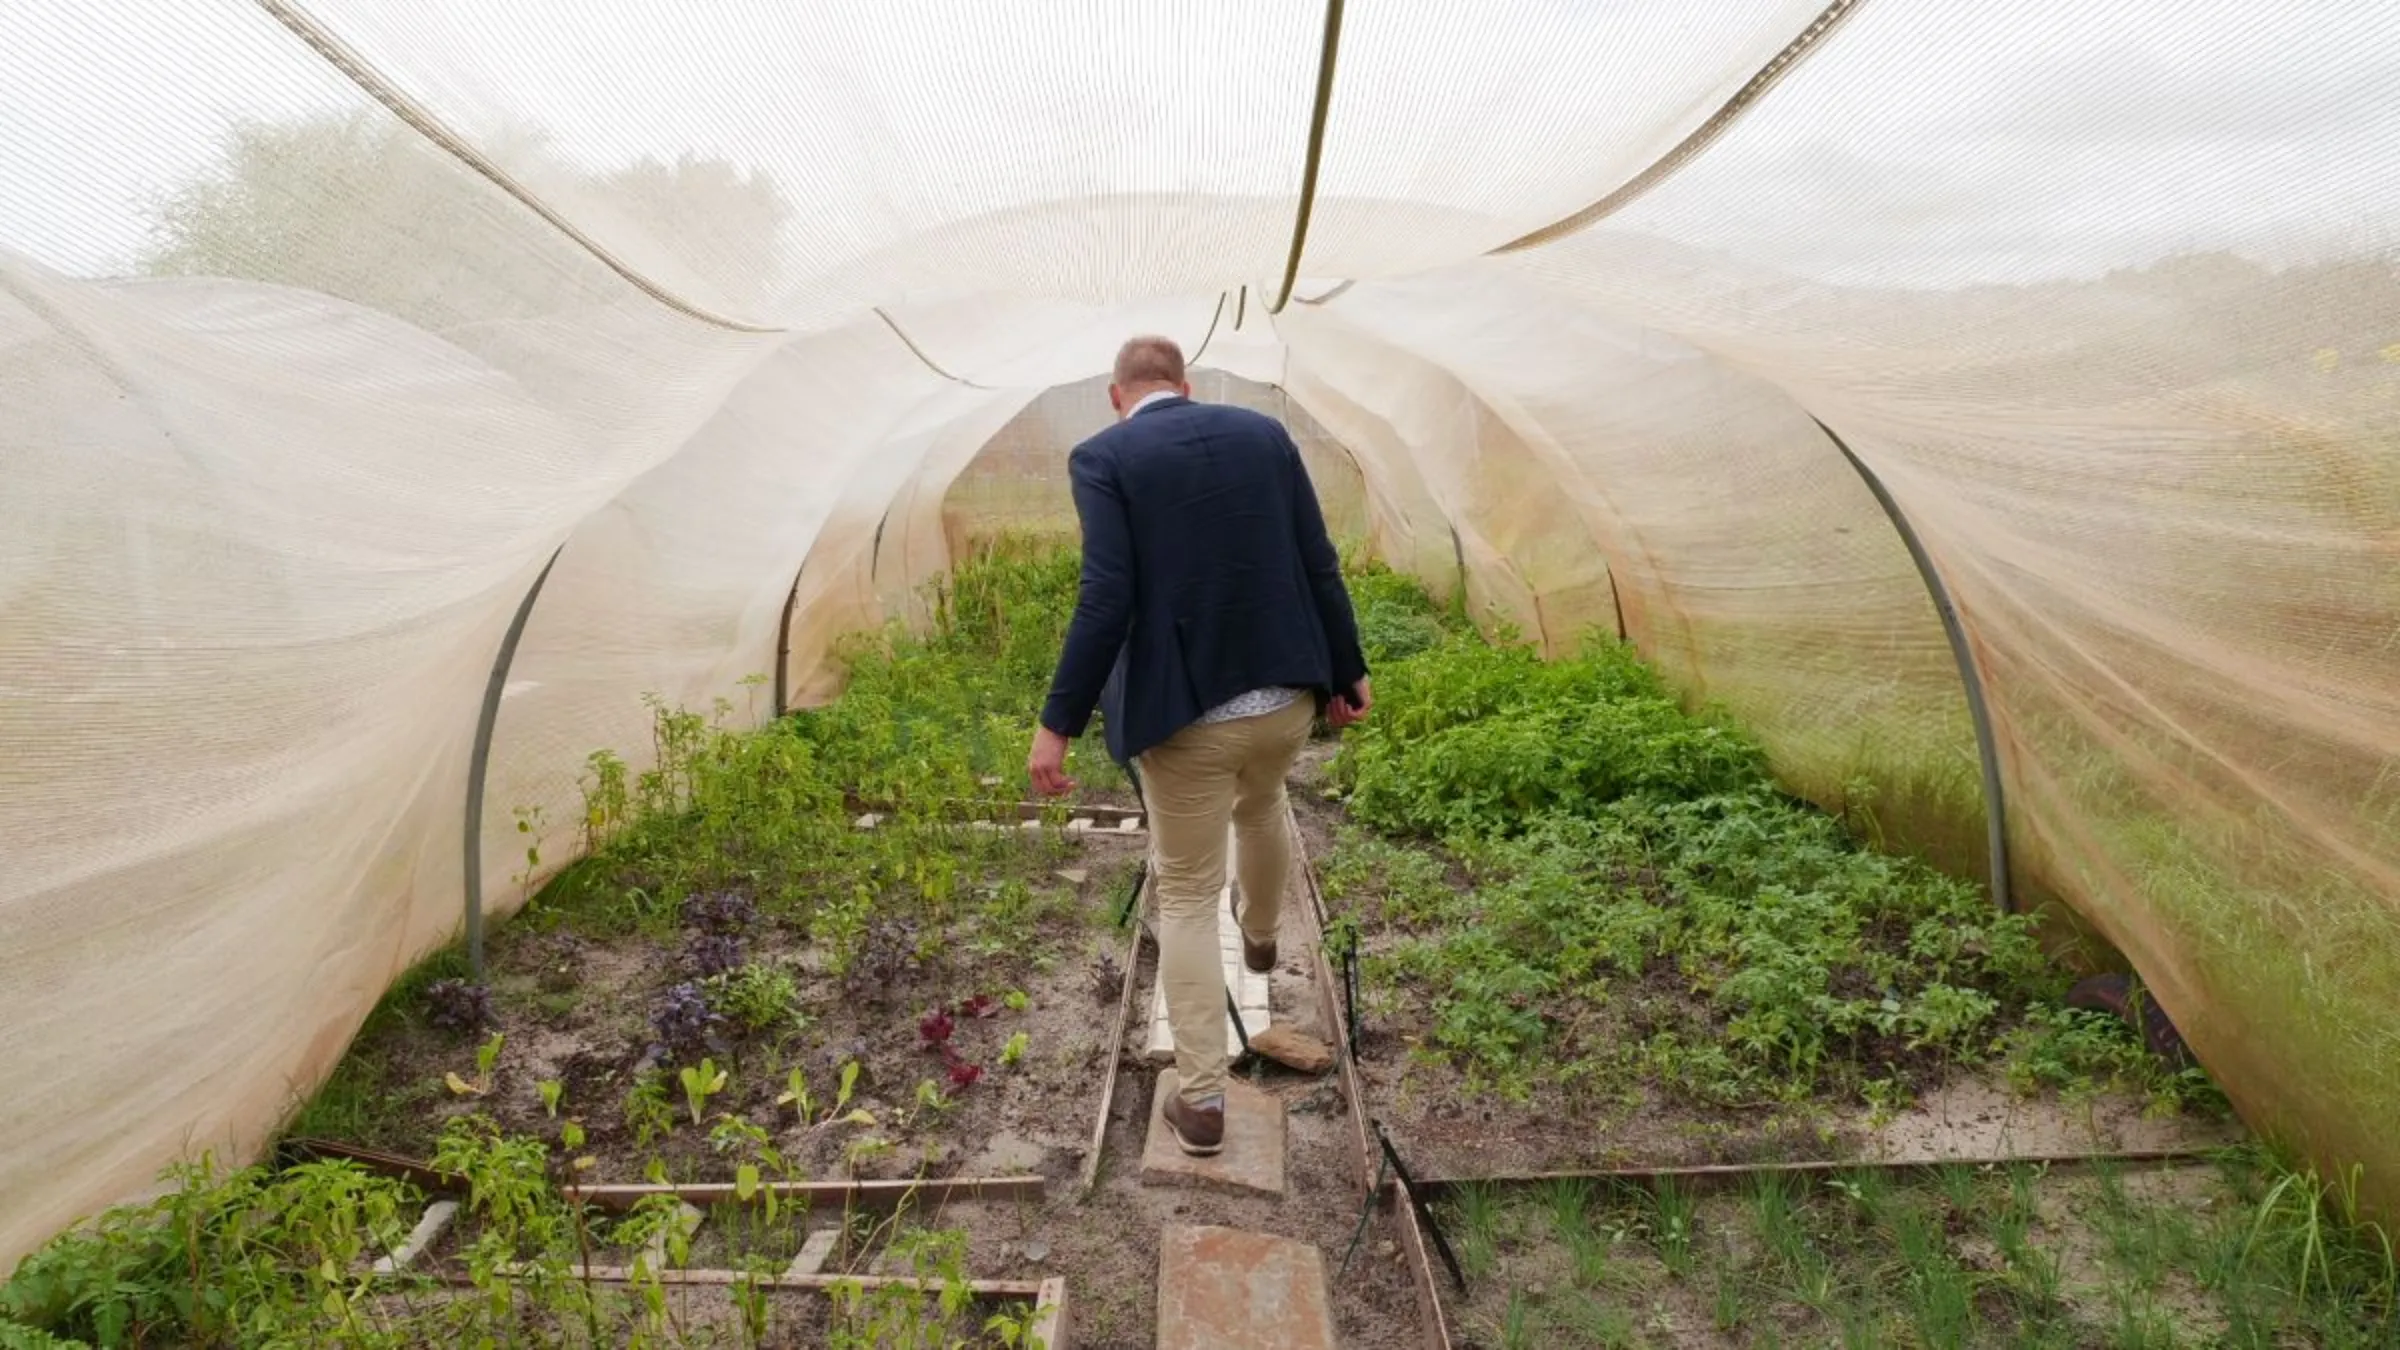 Gavin Francis, who helps teach former gangsters how to farm, walks through a vegetable tunnel set up outside a drug rehabilitation facility in Cape Town, South Africa, March 9, 2023. Thomson Reuters Foundation/Kim Harrisberg